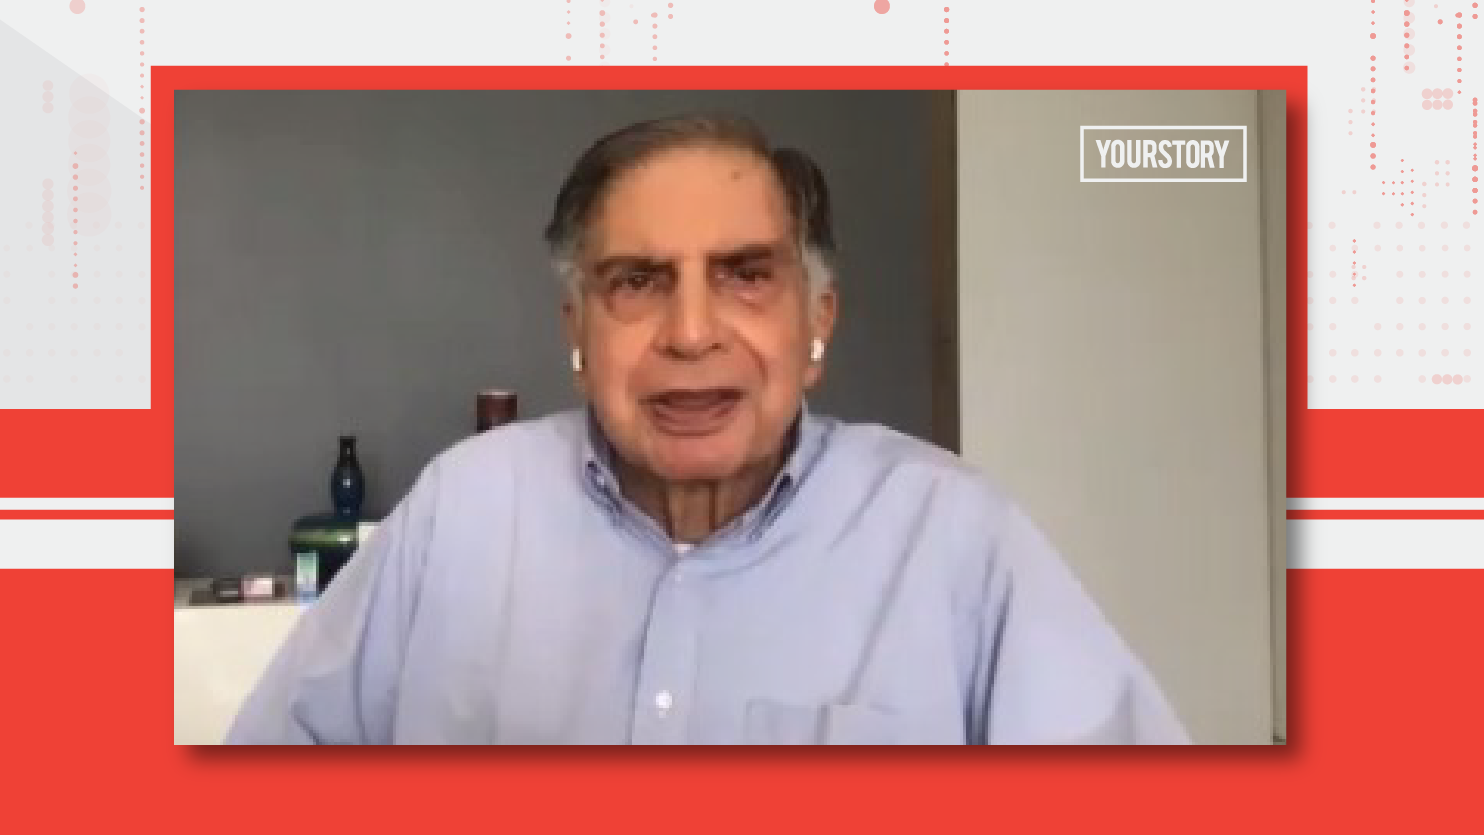 Ratan Tata on how empathy played a huge role in overcoming challenges